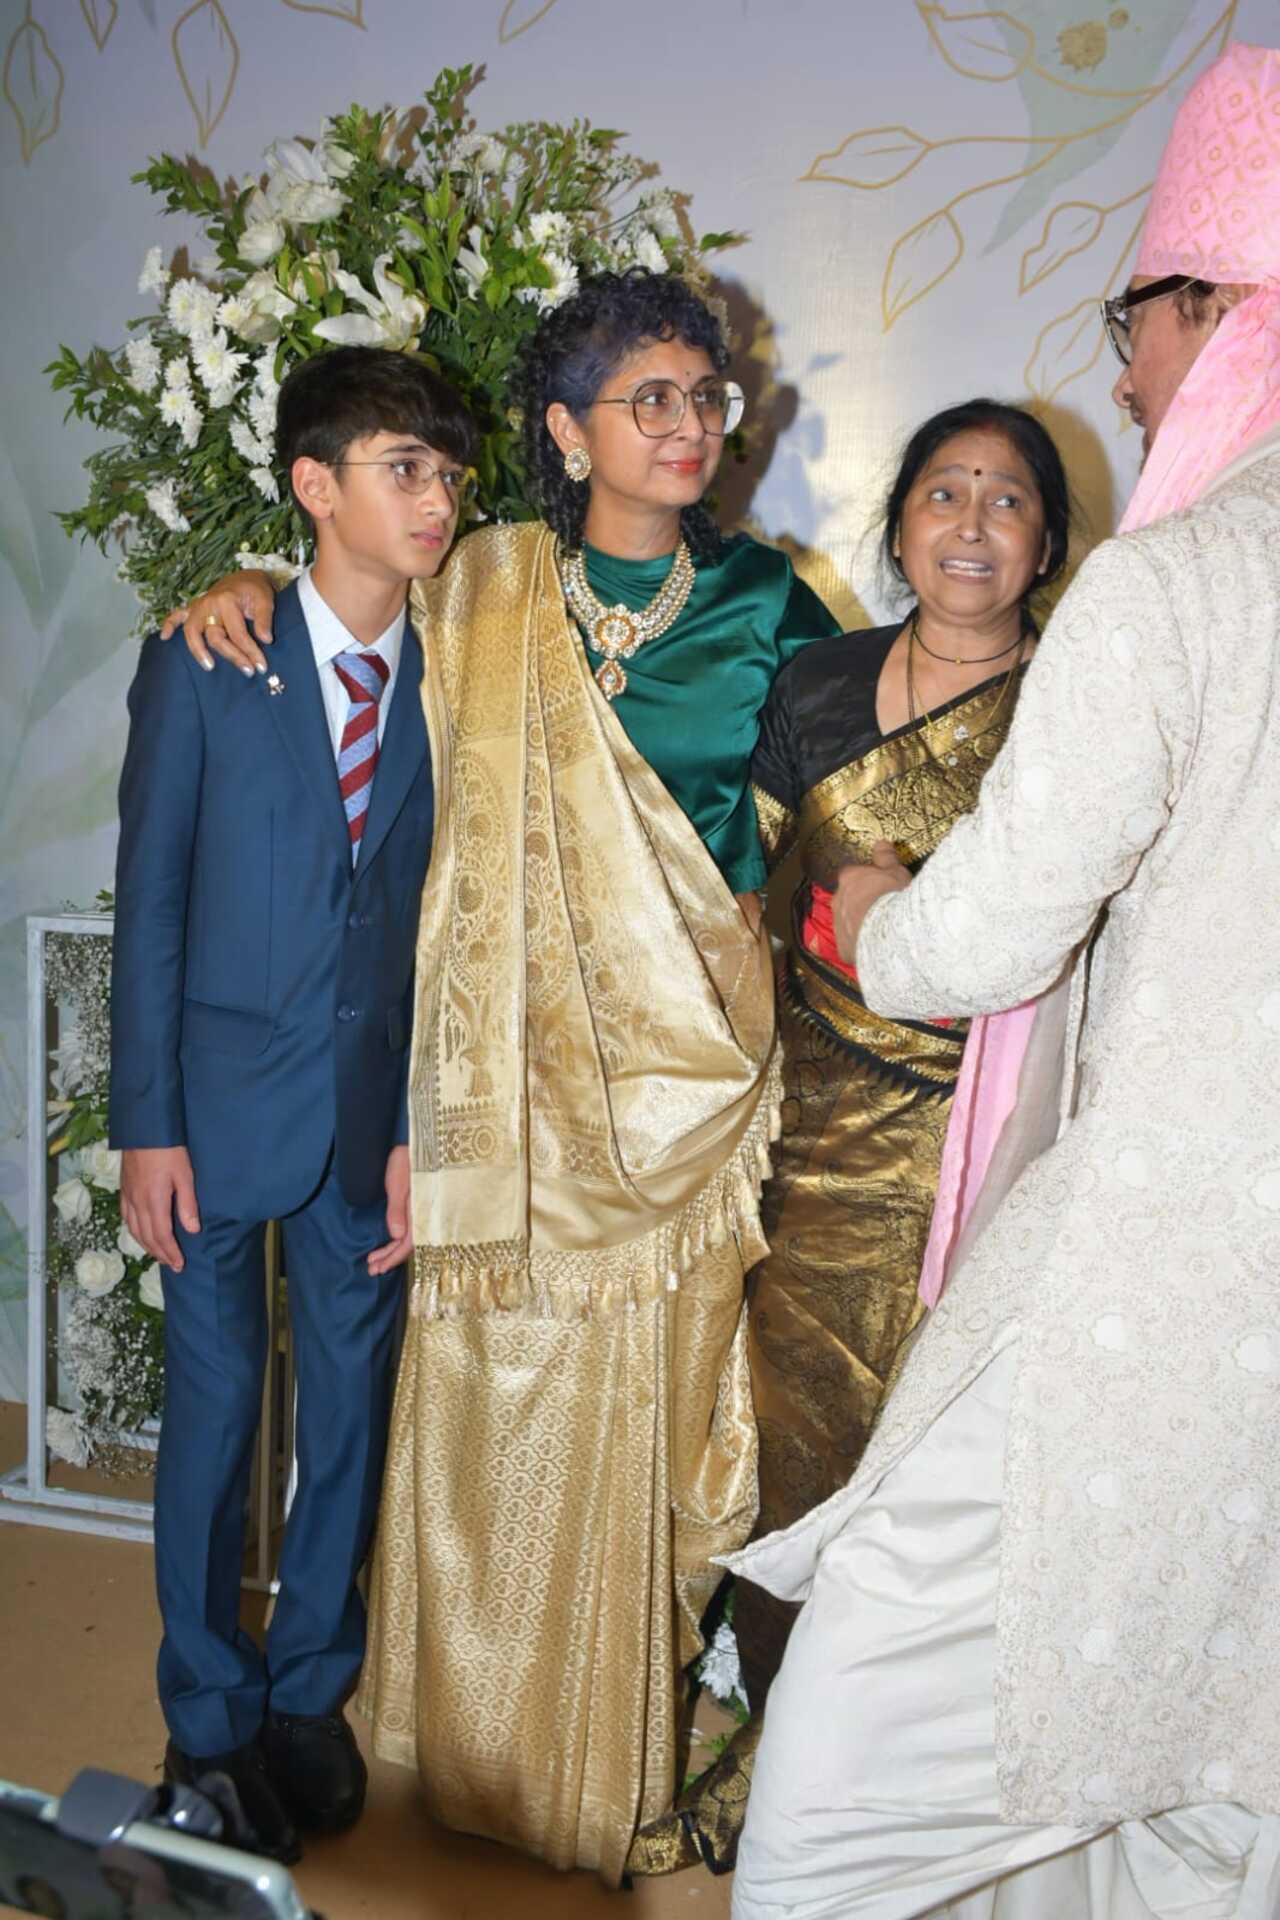 For the wedding, Kiran Rao opted for a golden saree and green blouse. Her son with Aamir Khan, Azad, looked smart in a dapper blue suit. Even after their separation, Kiran and Aamir share a friendly bond and the former is close to Ira, Junaid and Reena Dutta